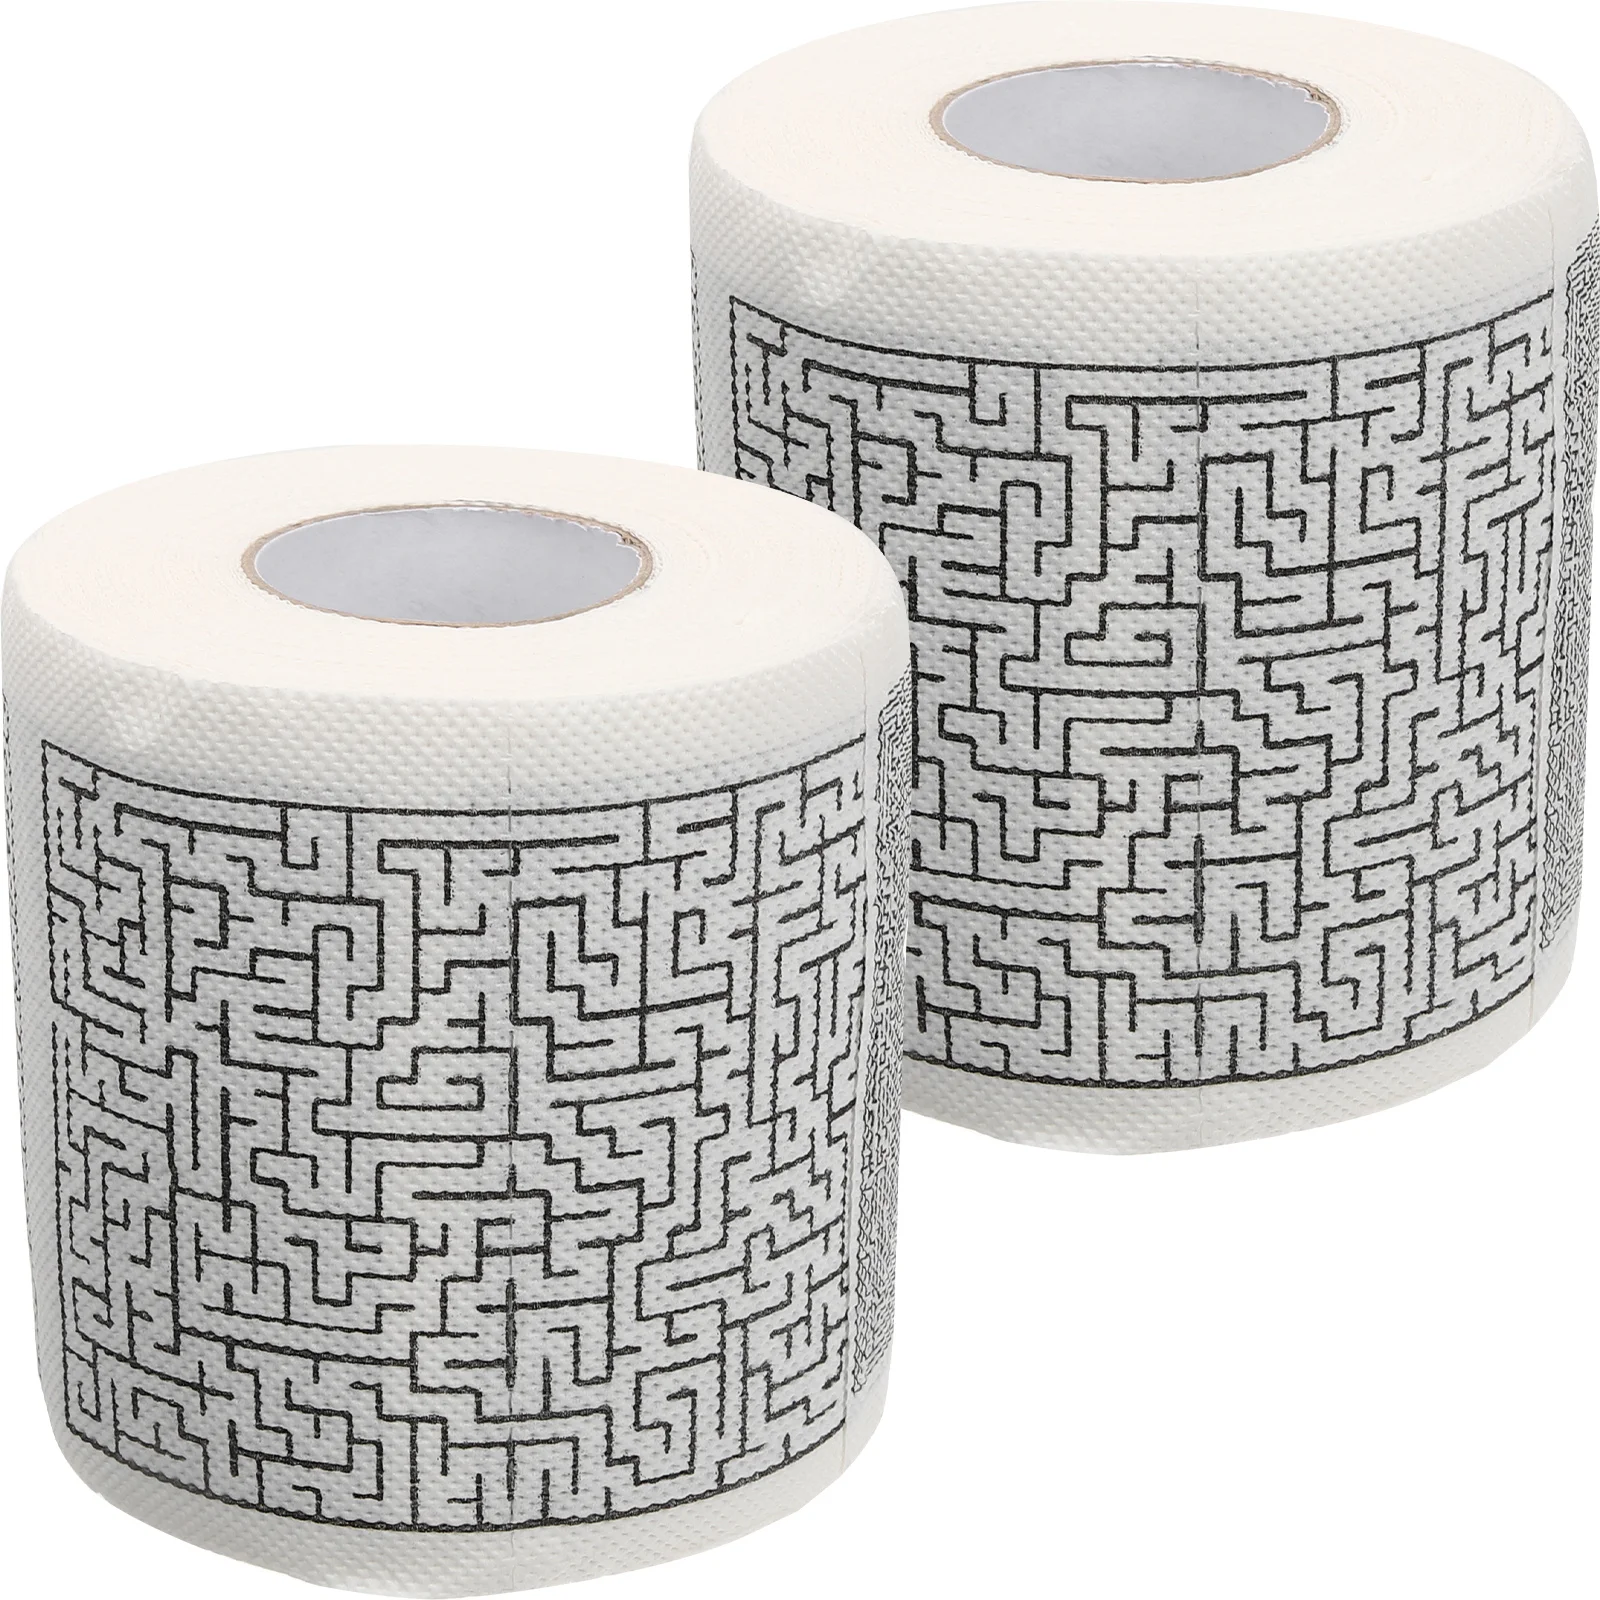 

Toilet Used Paper Bathroom Napkin Papers Napkins Maze Printing Printed Supplies Colored Tissue